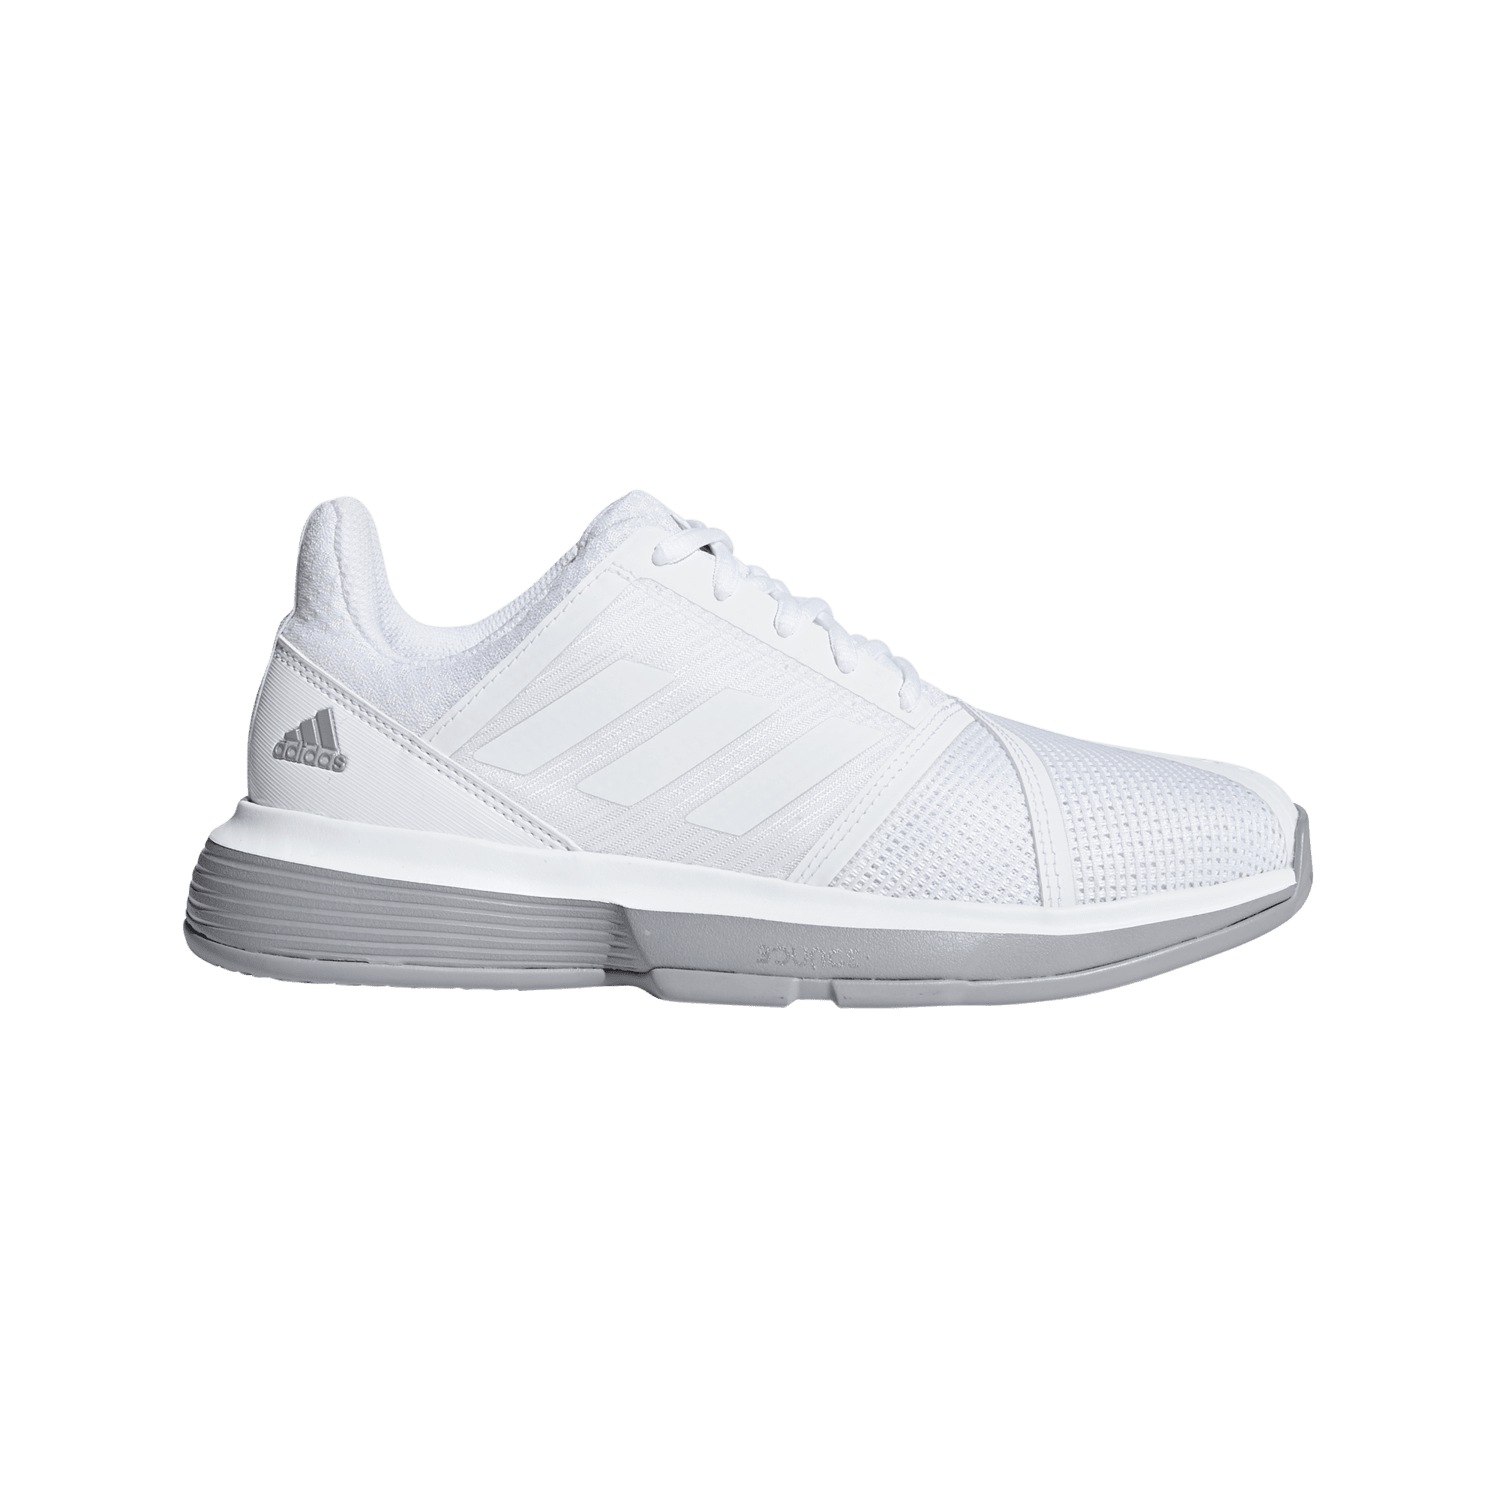 adidas courtjam bounce white women's shoes